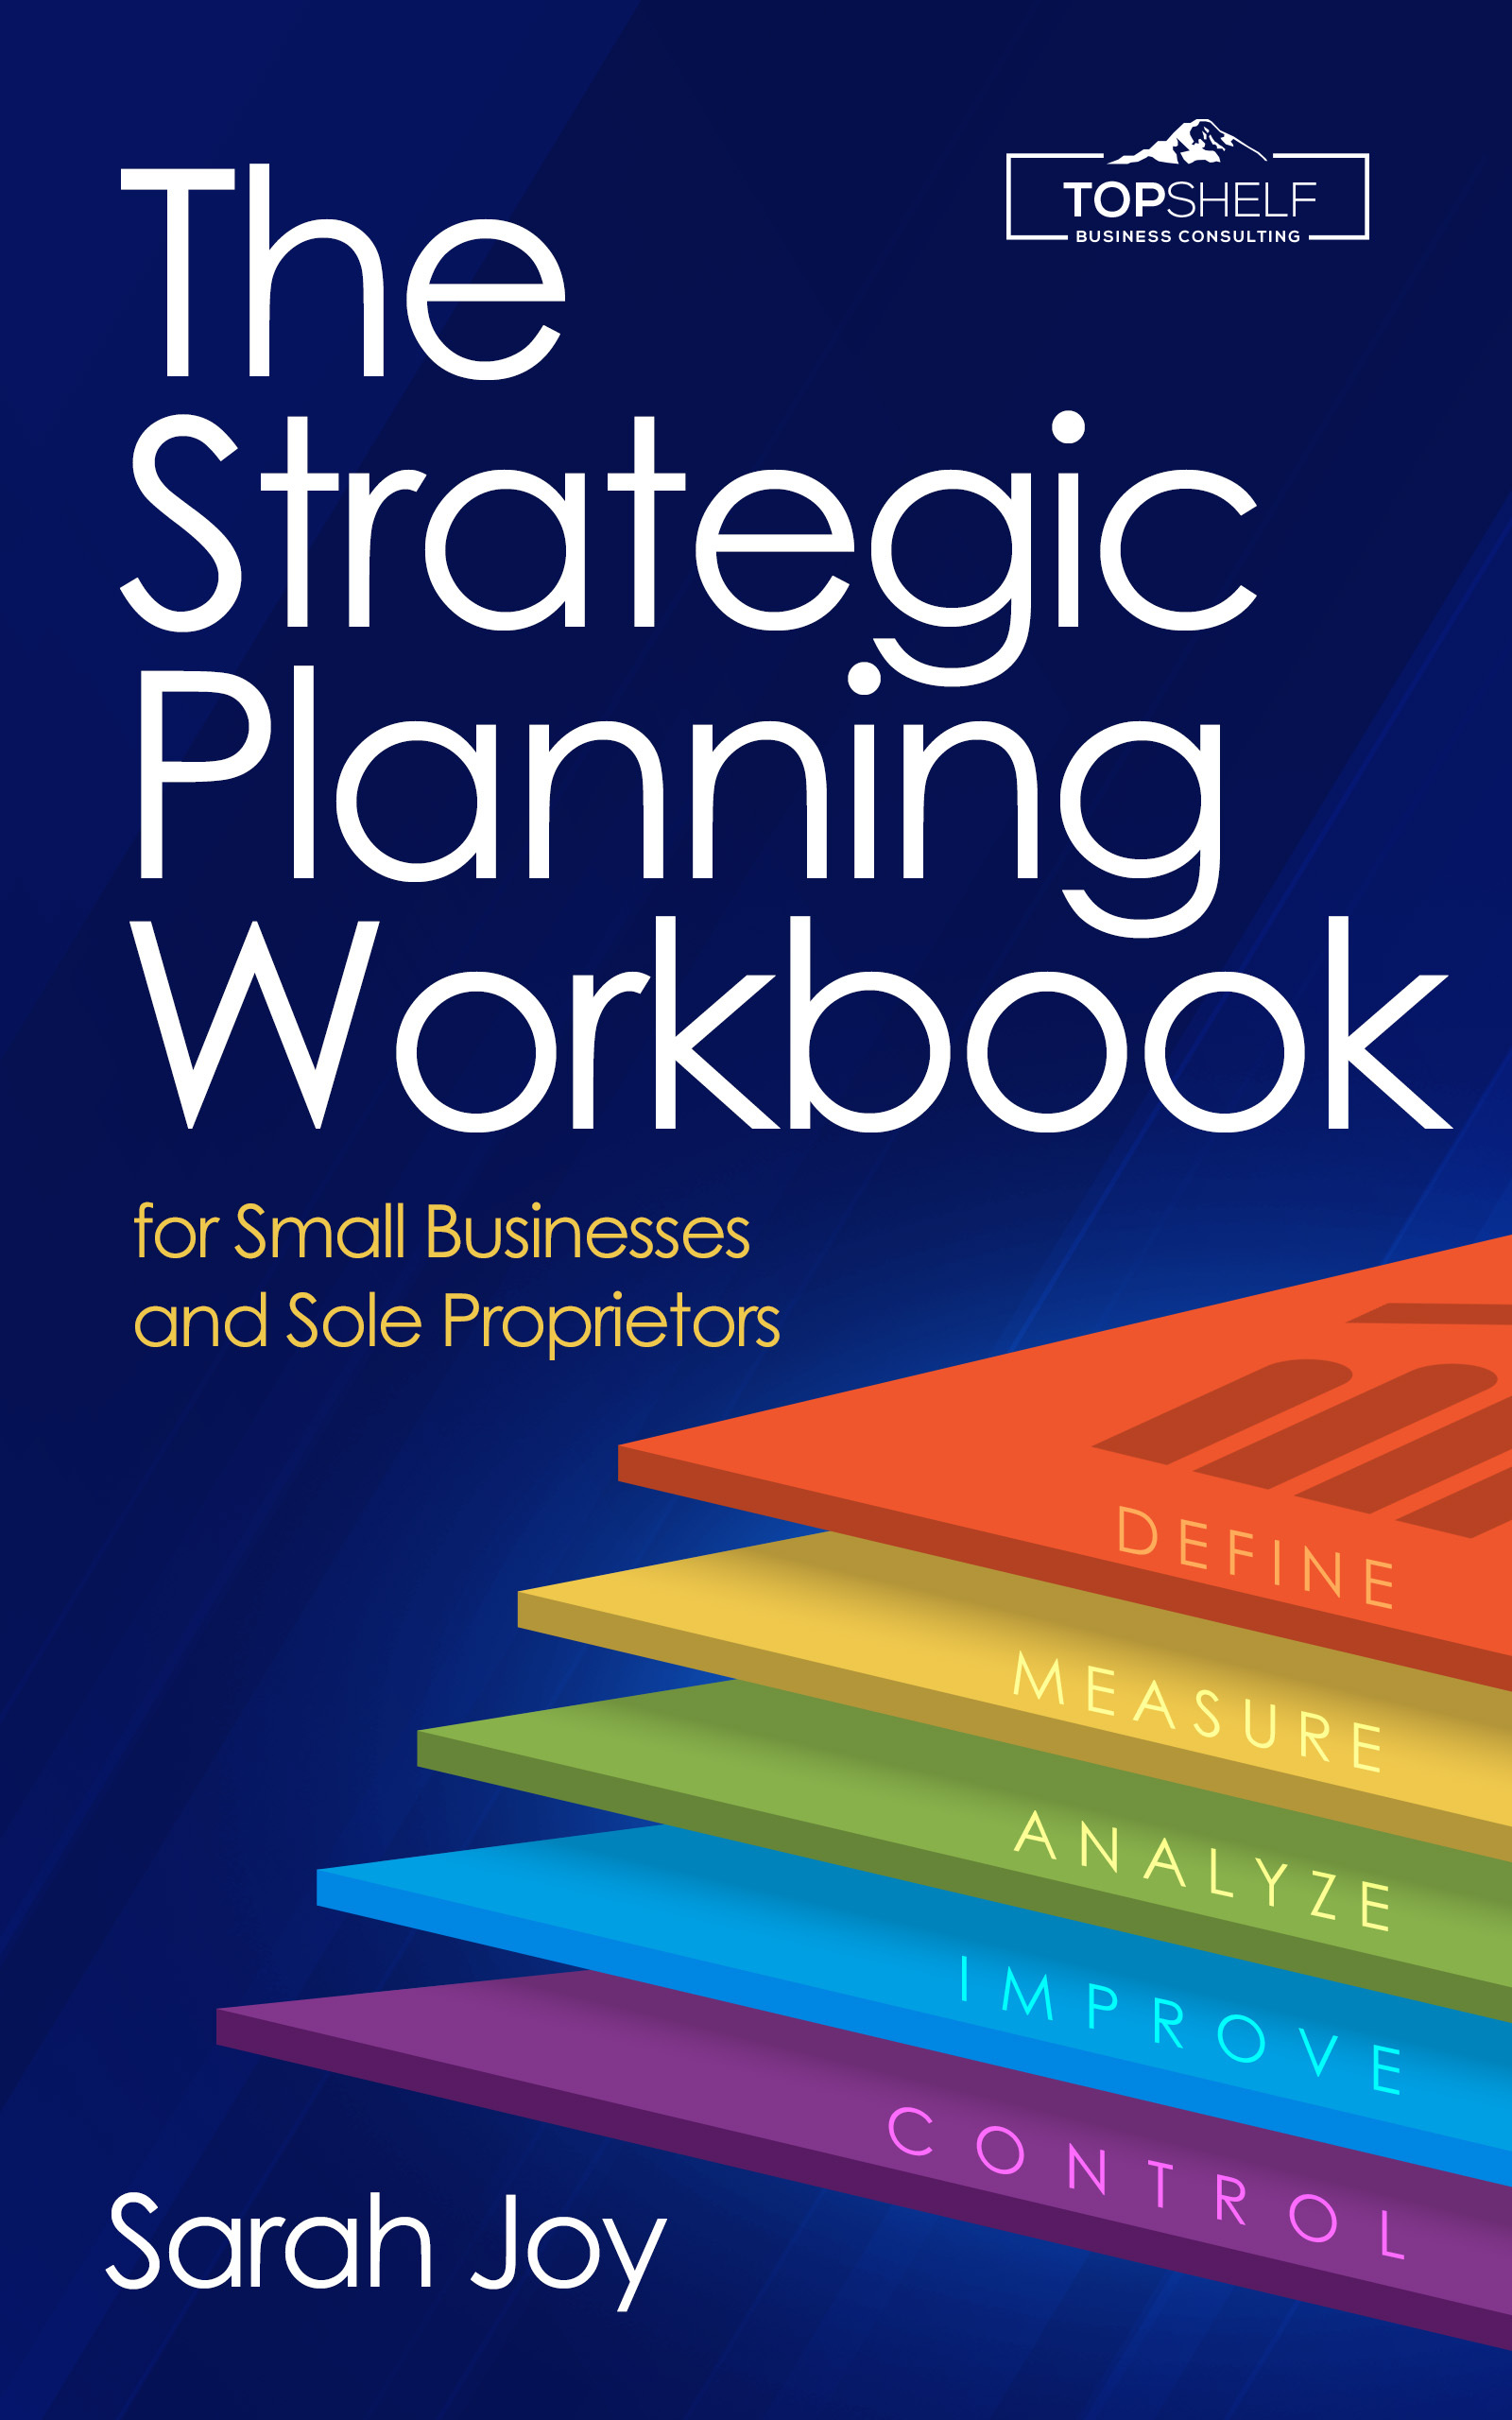 New book "The Strategic Planning Workbook" by Sarah Joy is released, a practical, interactive approach to small business planning that cuts through the noise and provides immediate results